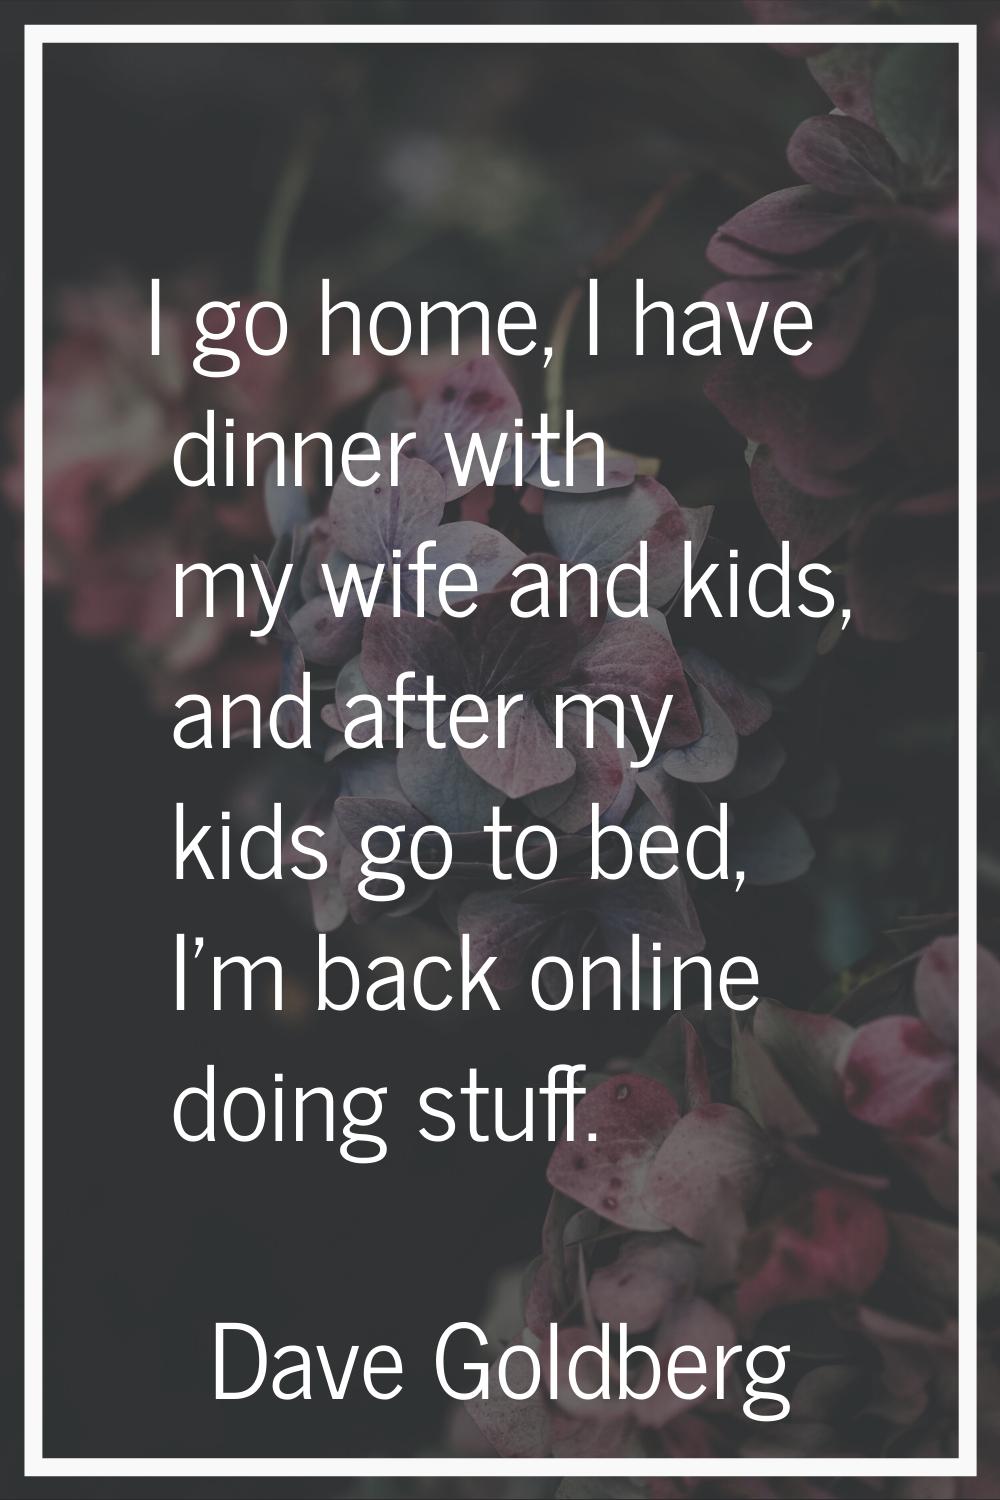 I go home, I have dinner with my wife and kids, and after my kids go to bed, I'm back online doing 